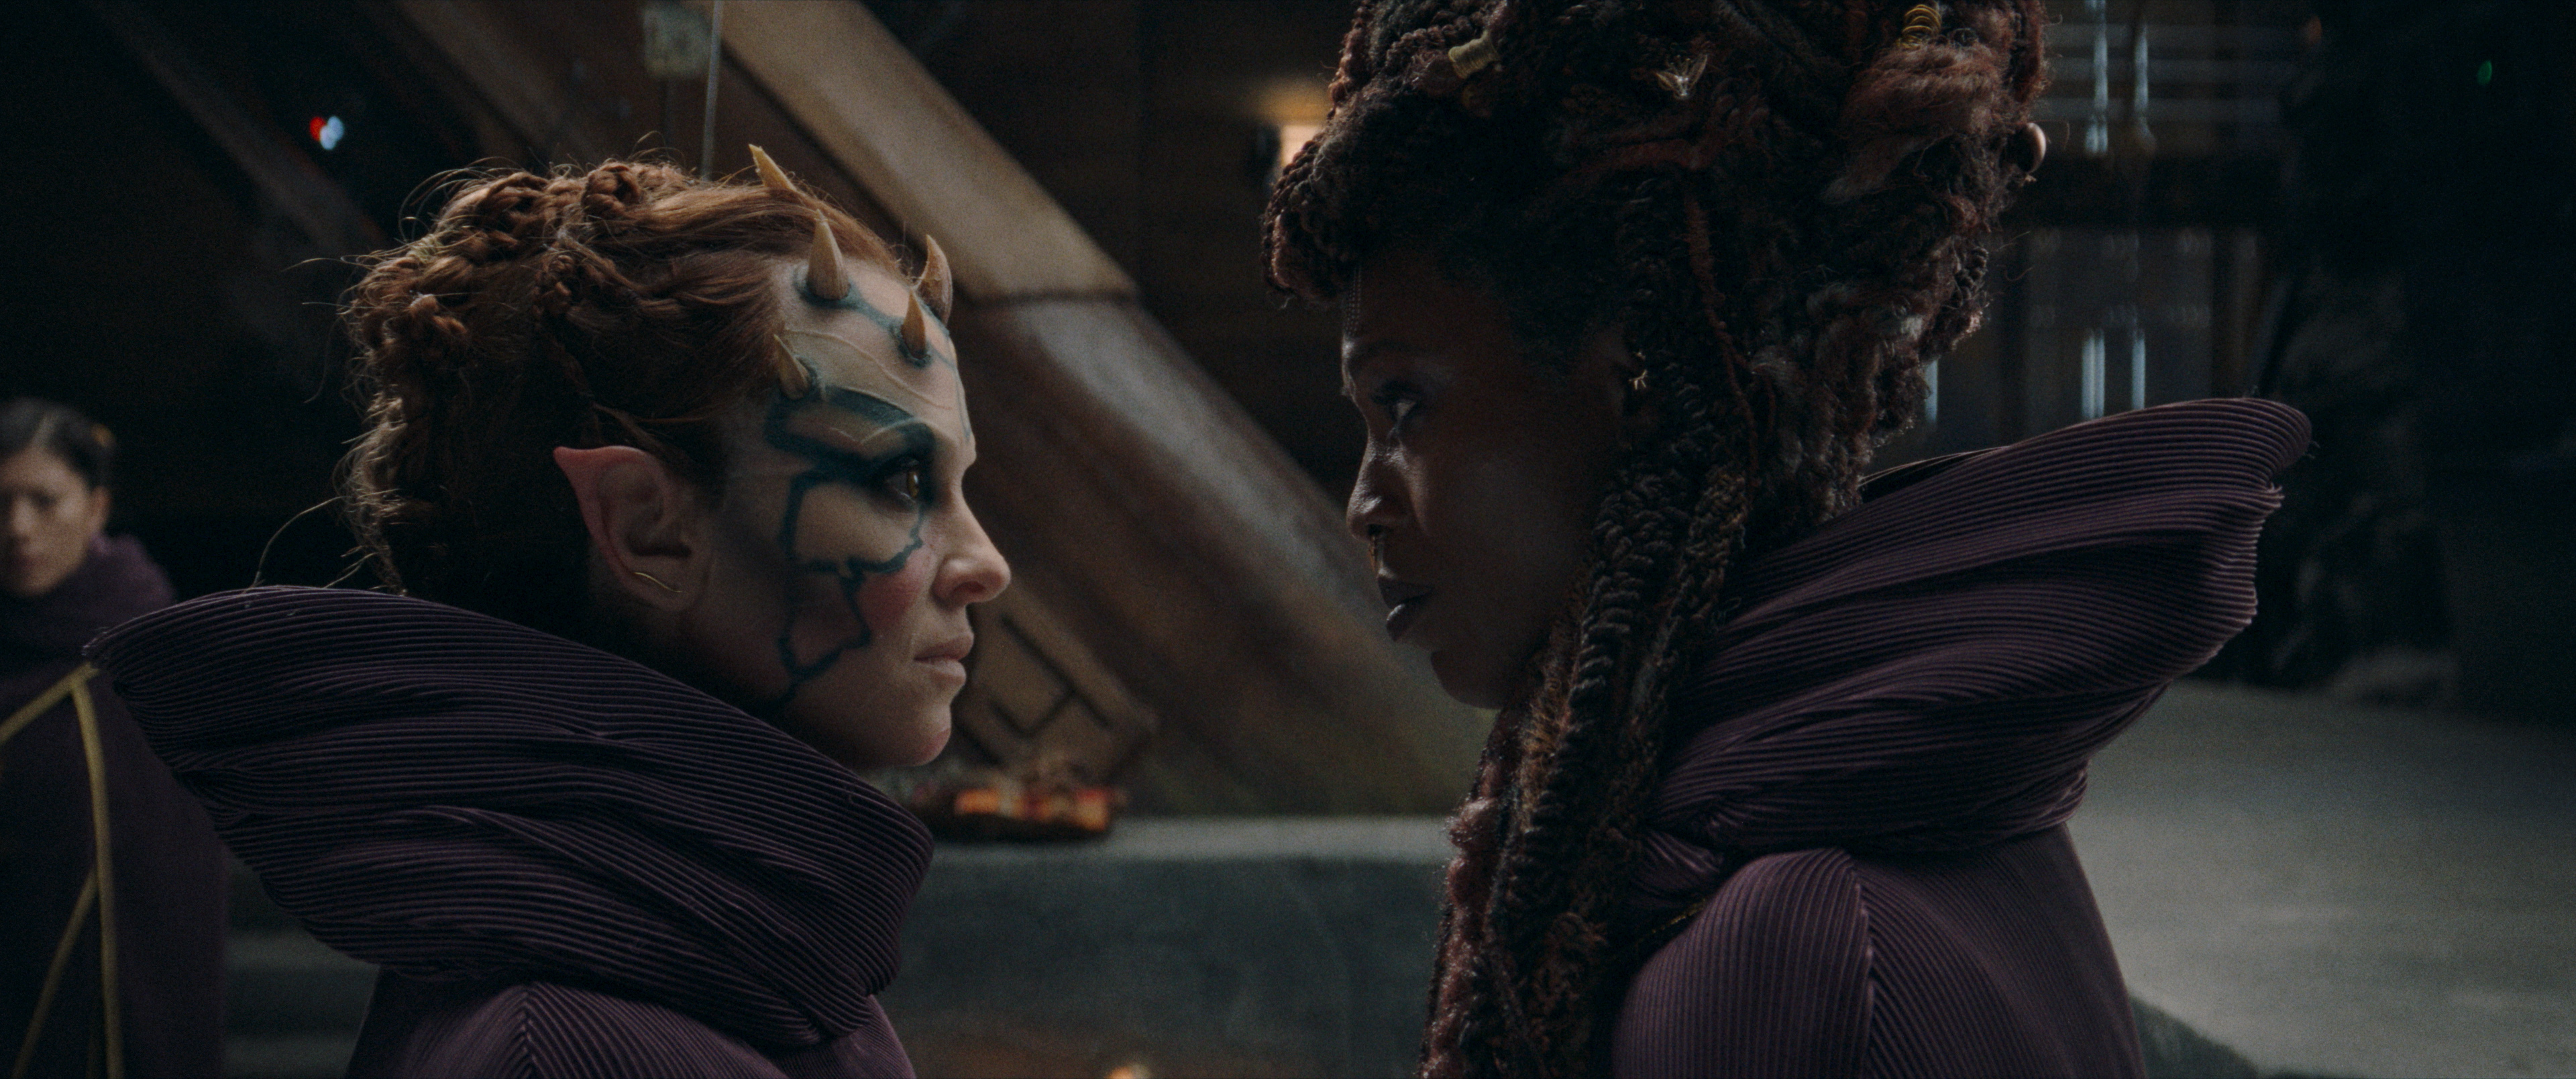 Mother Koril (Margarita Levieva) and Mother Aniseya (Jodie Turner-Smith) looking at each other up close